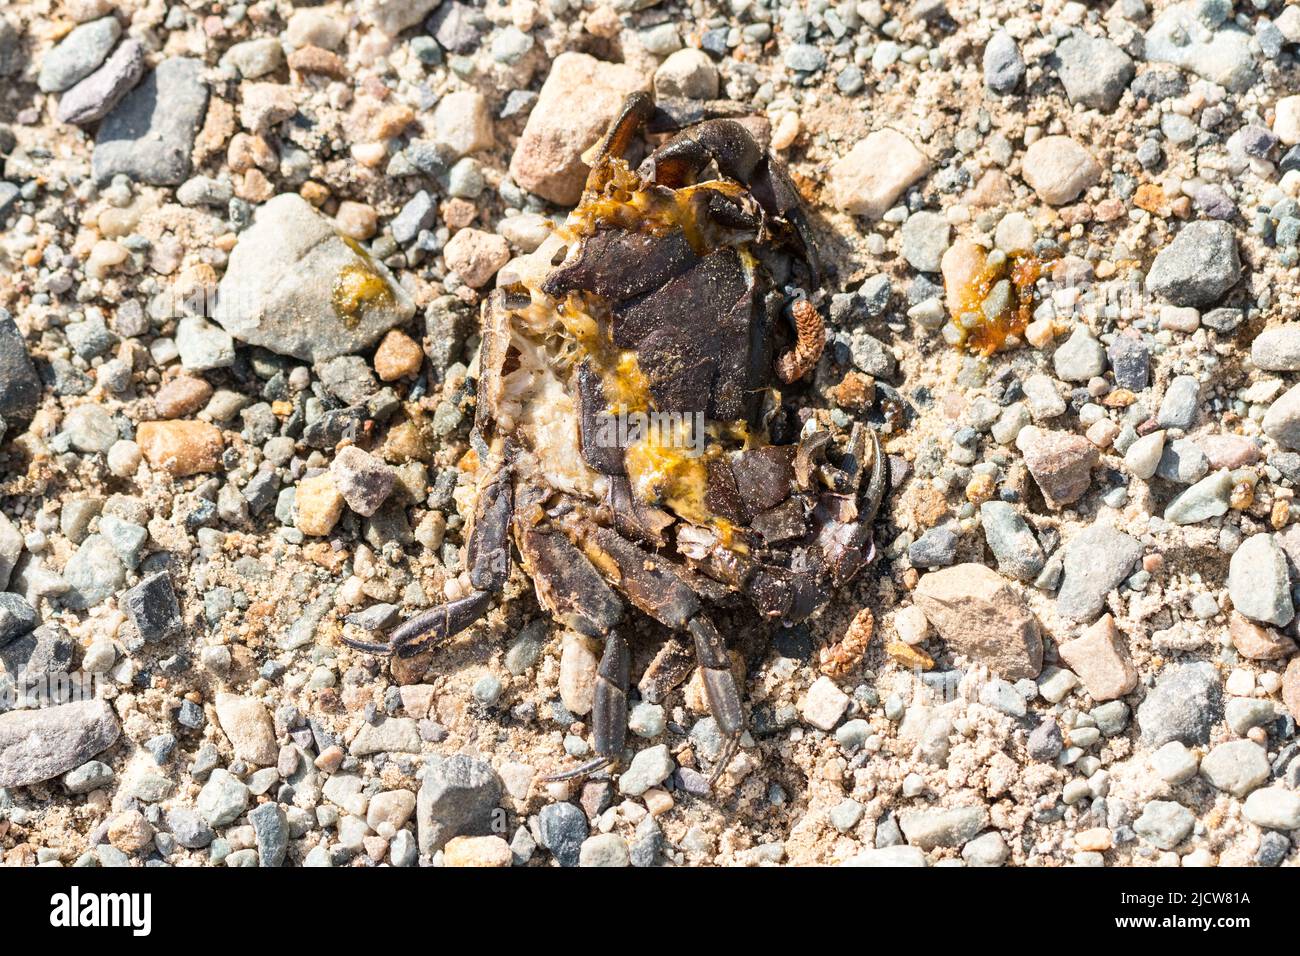 roadkill, dead squashed freshwater crab lying on stones closeup, abstract nature Stock Photo